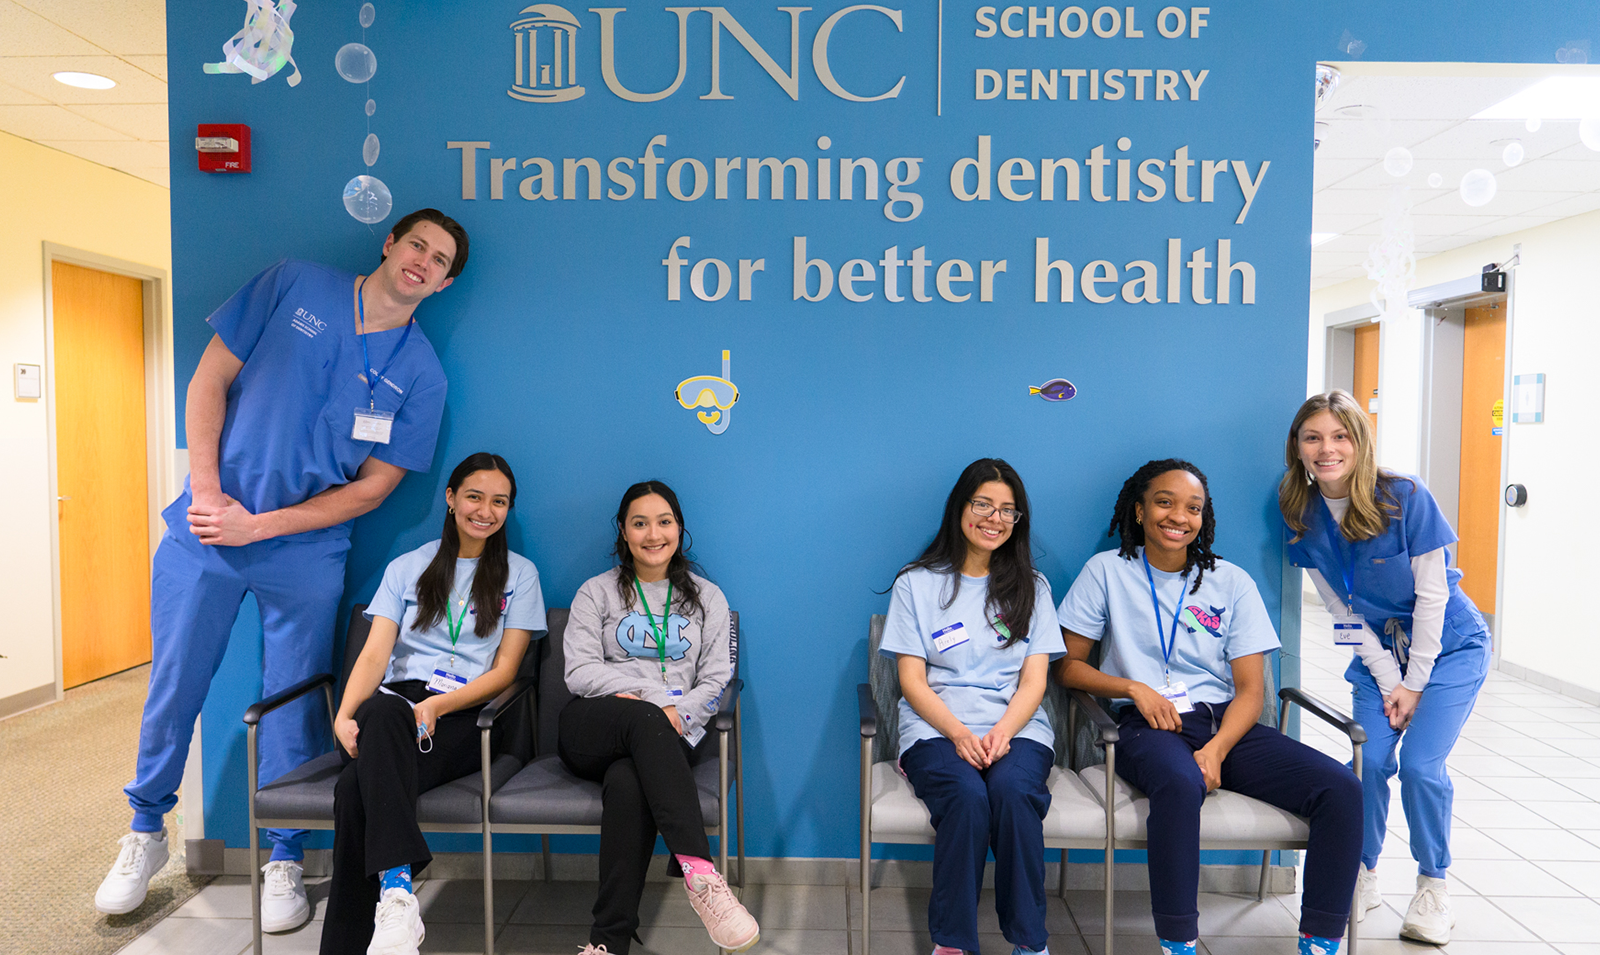 Dentistry students posing in front of sign that says 